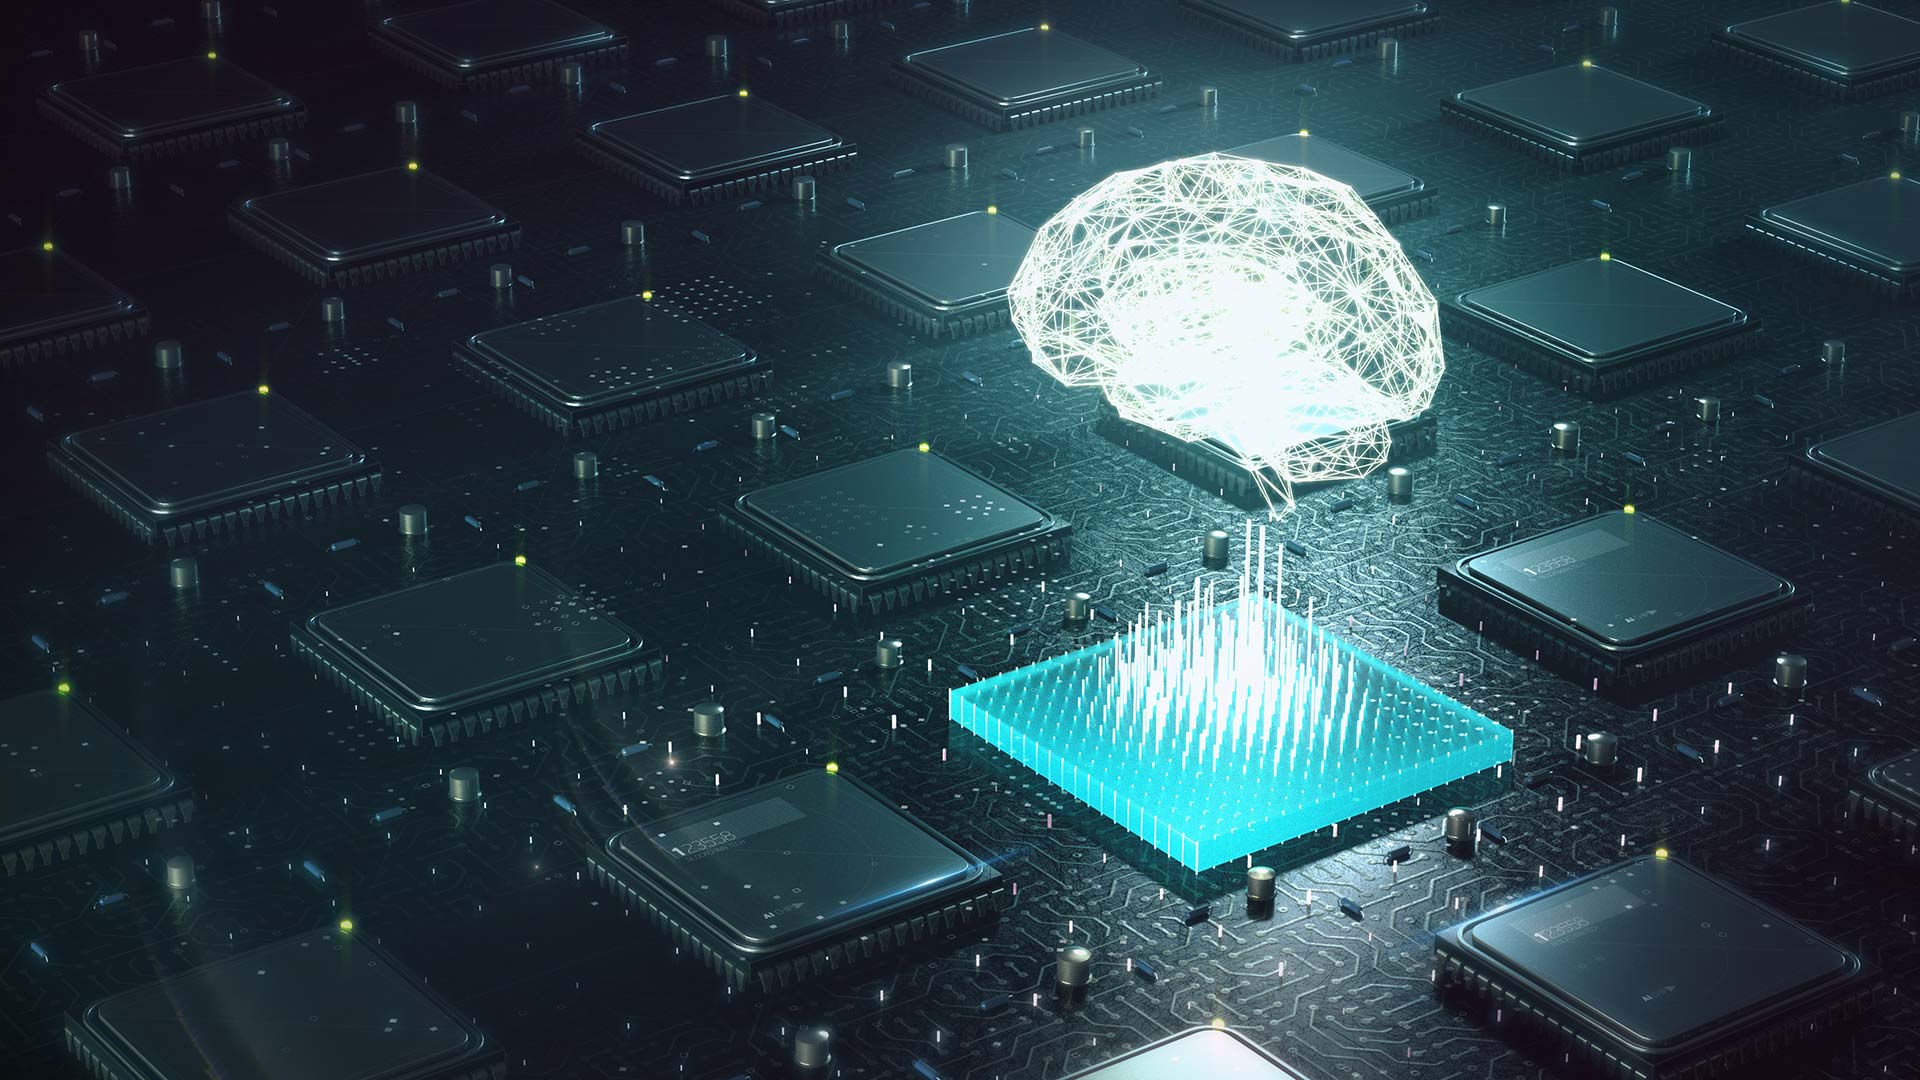 Digital brain coming out of microchip, illustration of machine learning and artifical intelligence